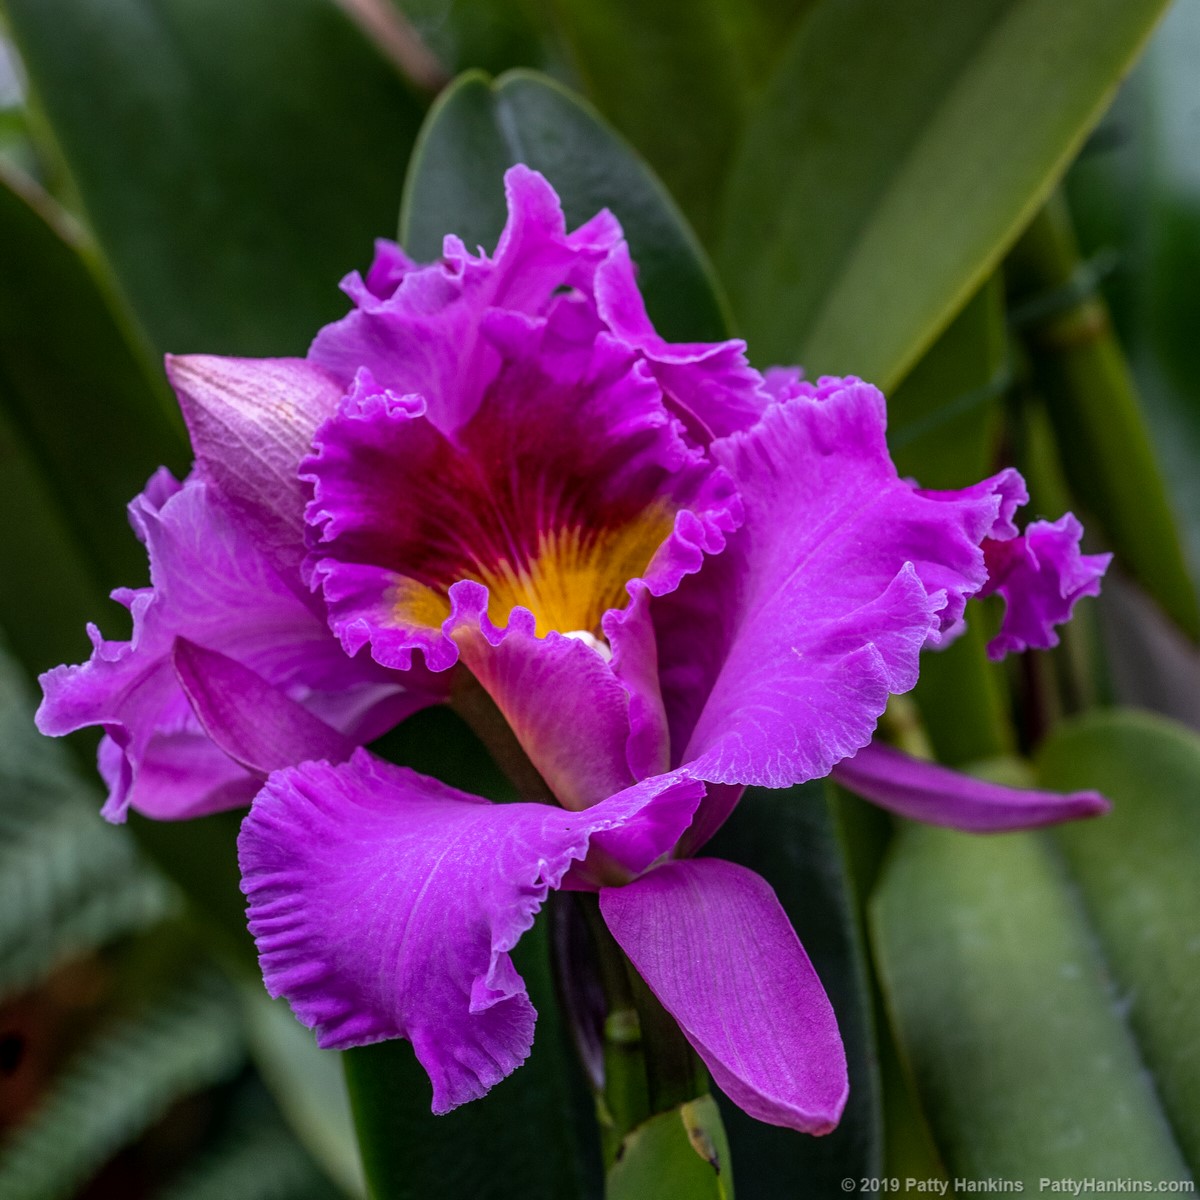 Orchid at Longwood Gardens © 2019 Patty Hankins